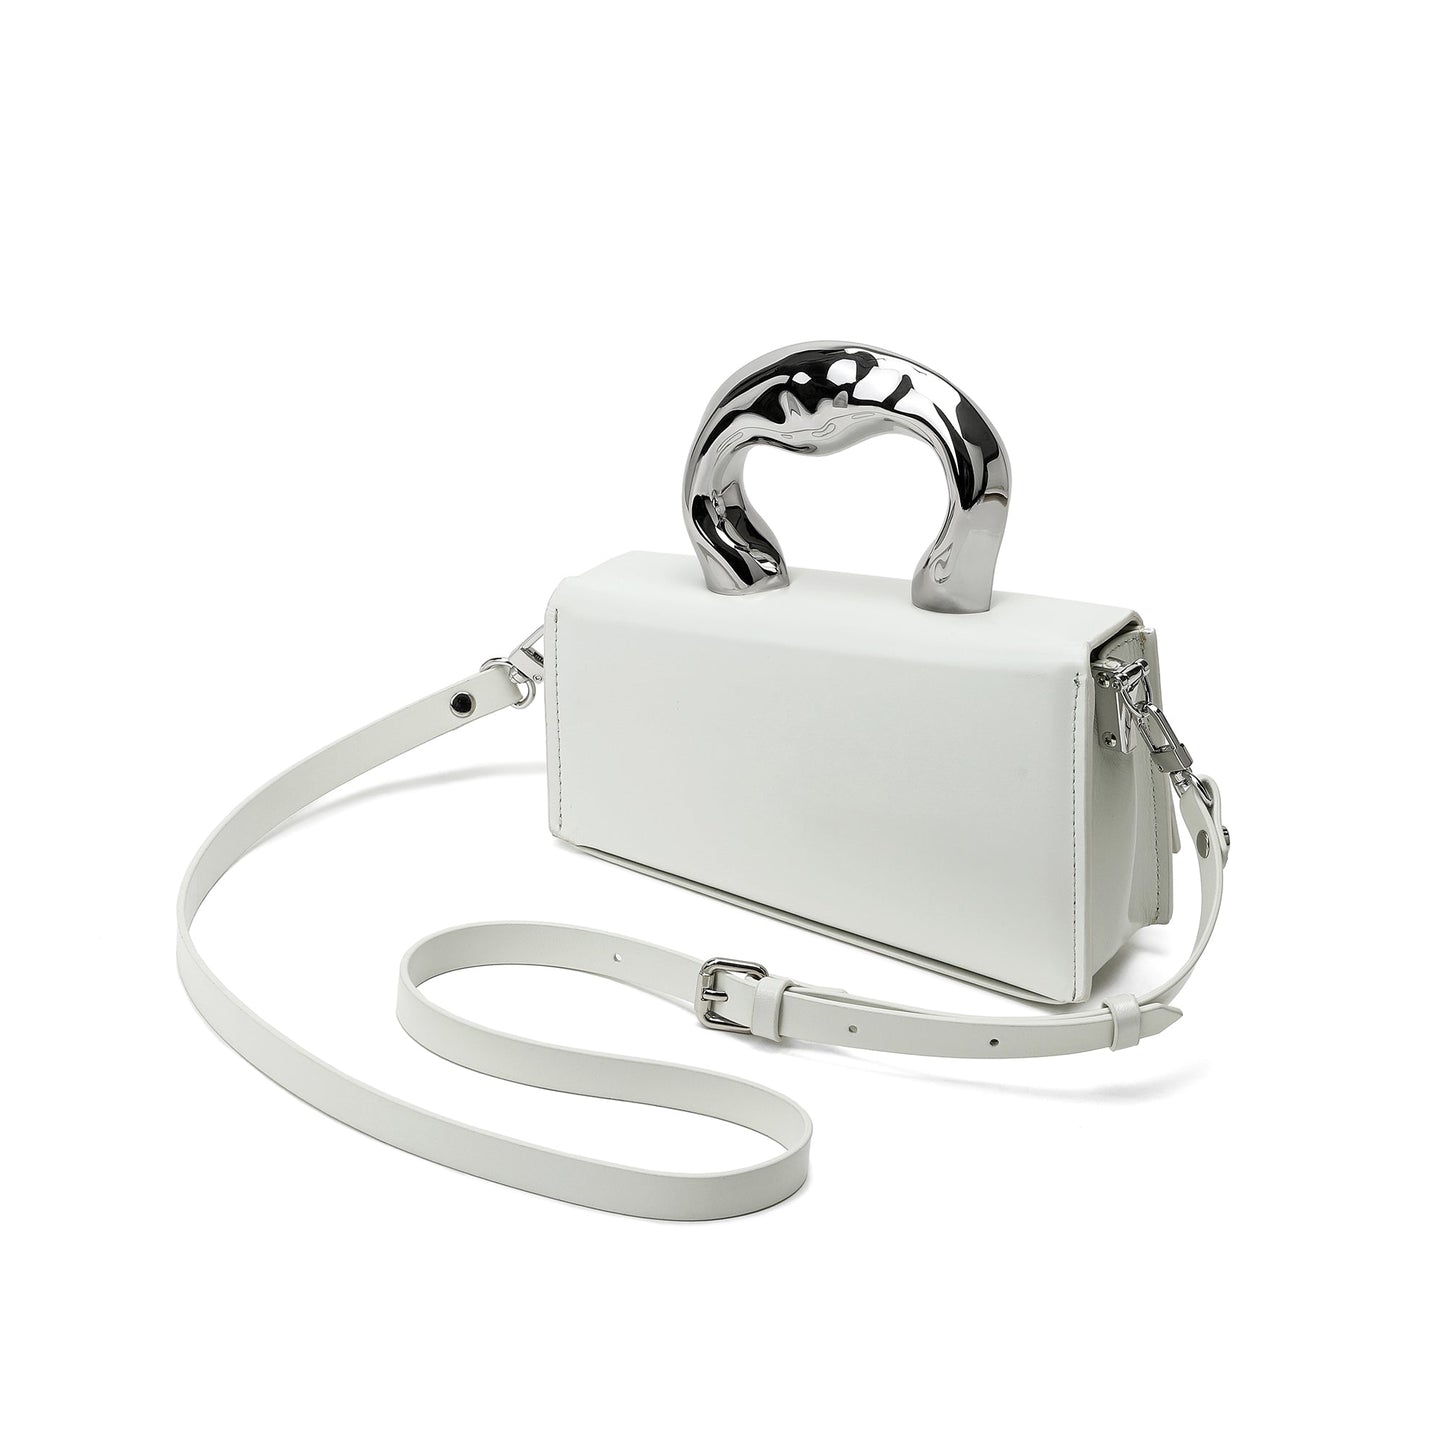 Smooth Leather Silver Handle bag # 2309